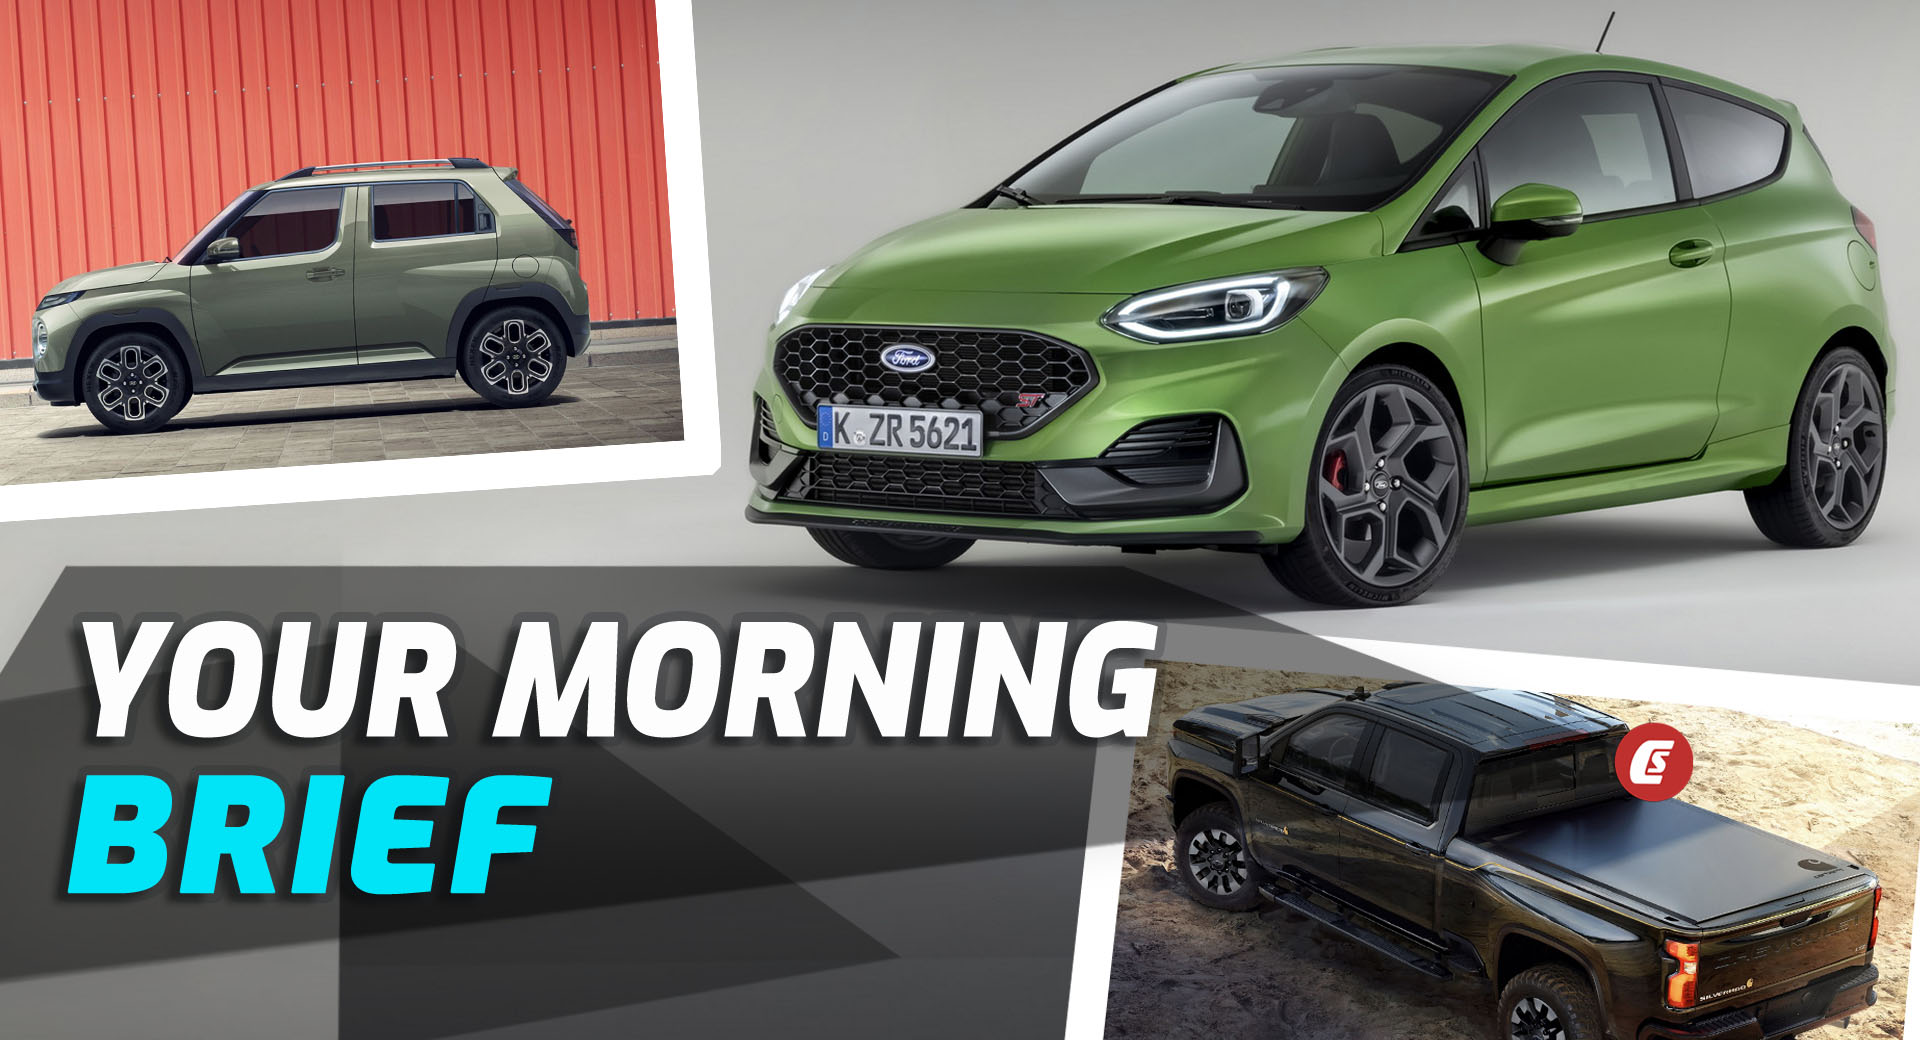 Facelifted 2022 Fiesta Revealed, Hyundai’s Cheapest SUV Goes On Sale, And A 500 HP V8 Diesel Silverado HD May Be Coming: Your Morning Brief